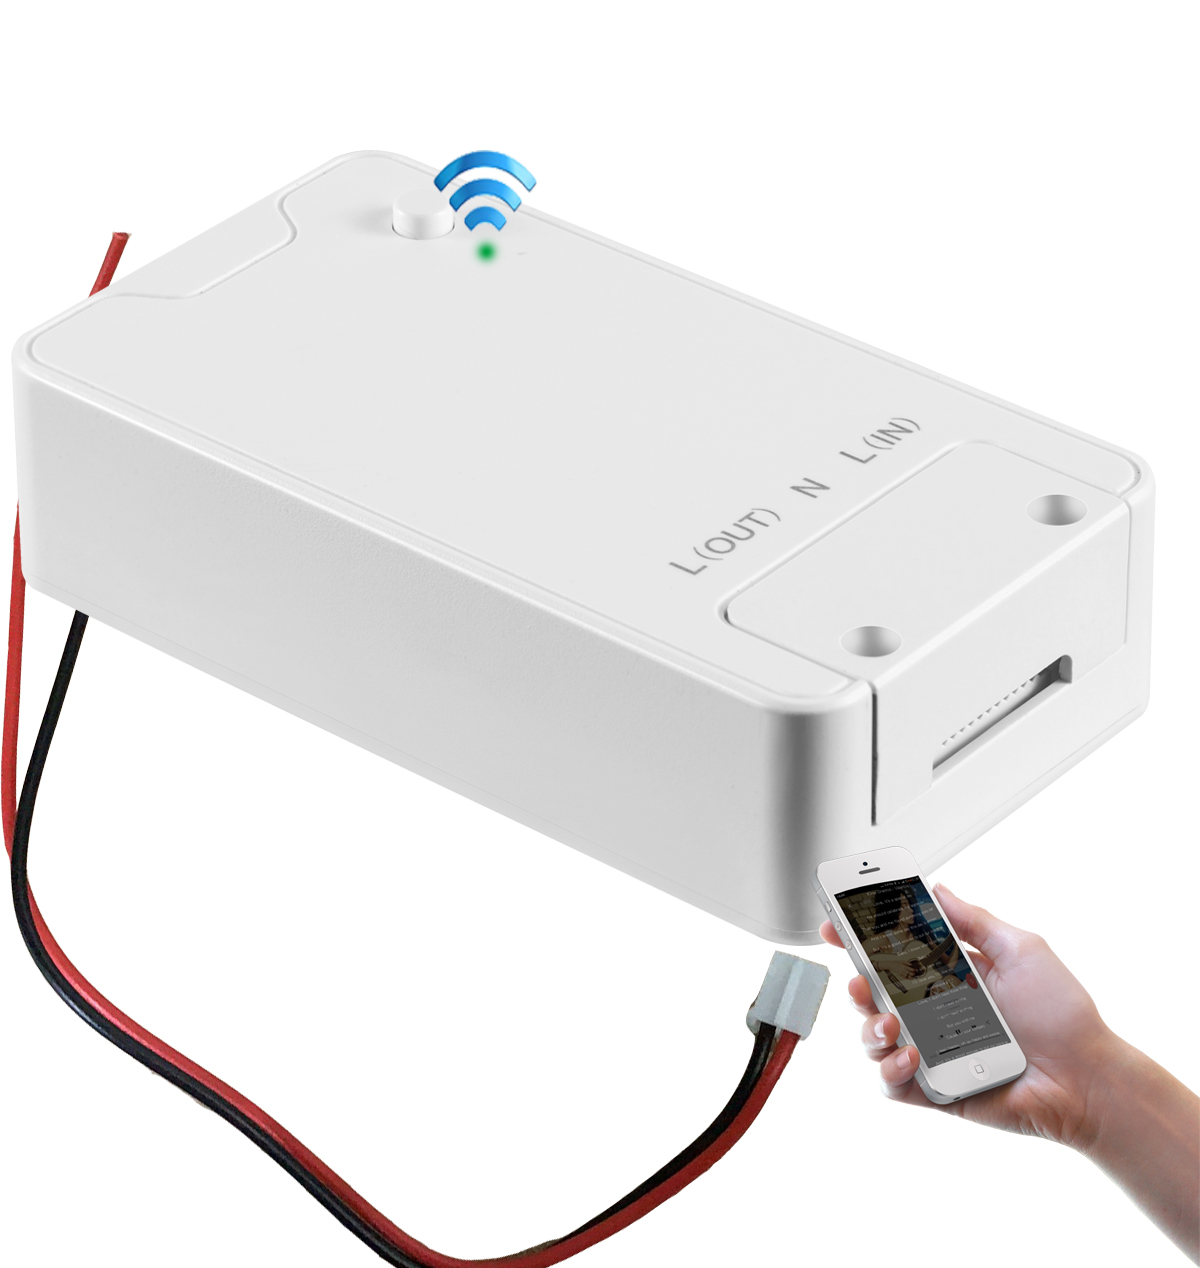 WiFi smart Switch For Home Automation_ 16A, 3500W